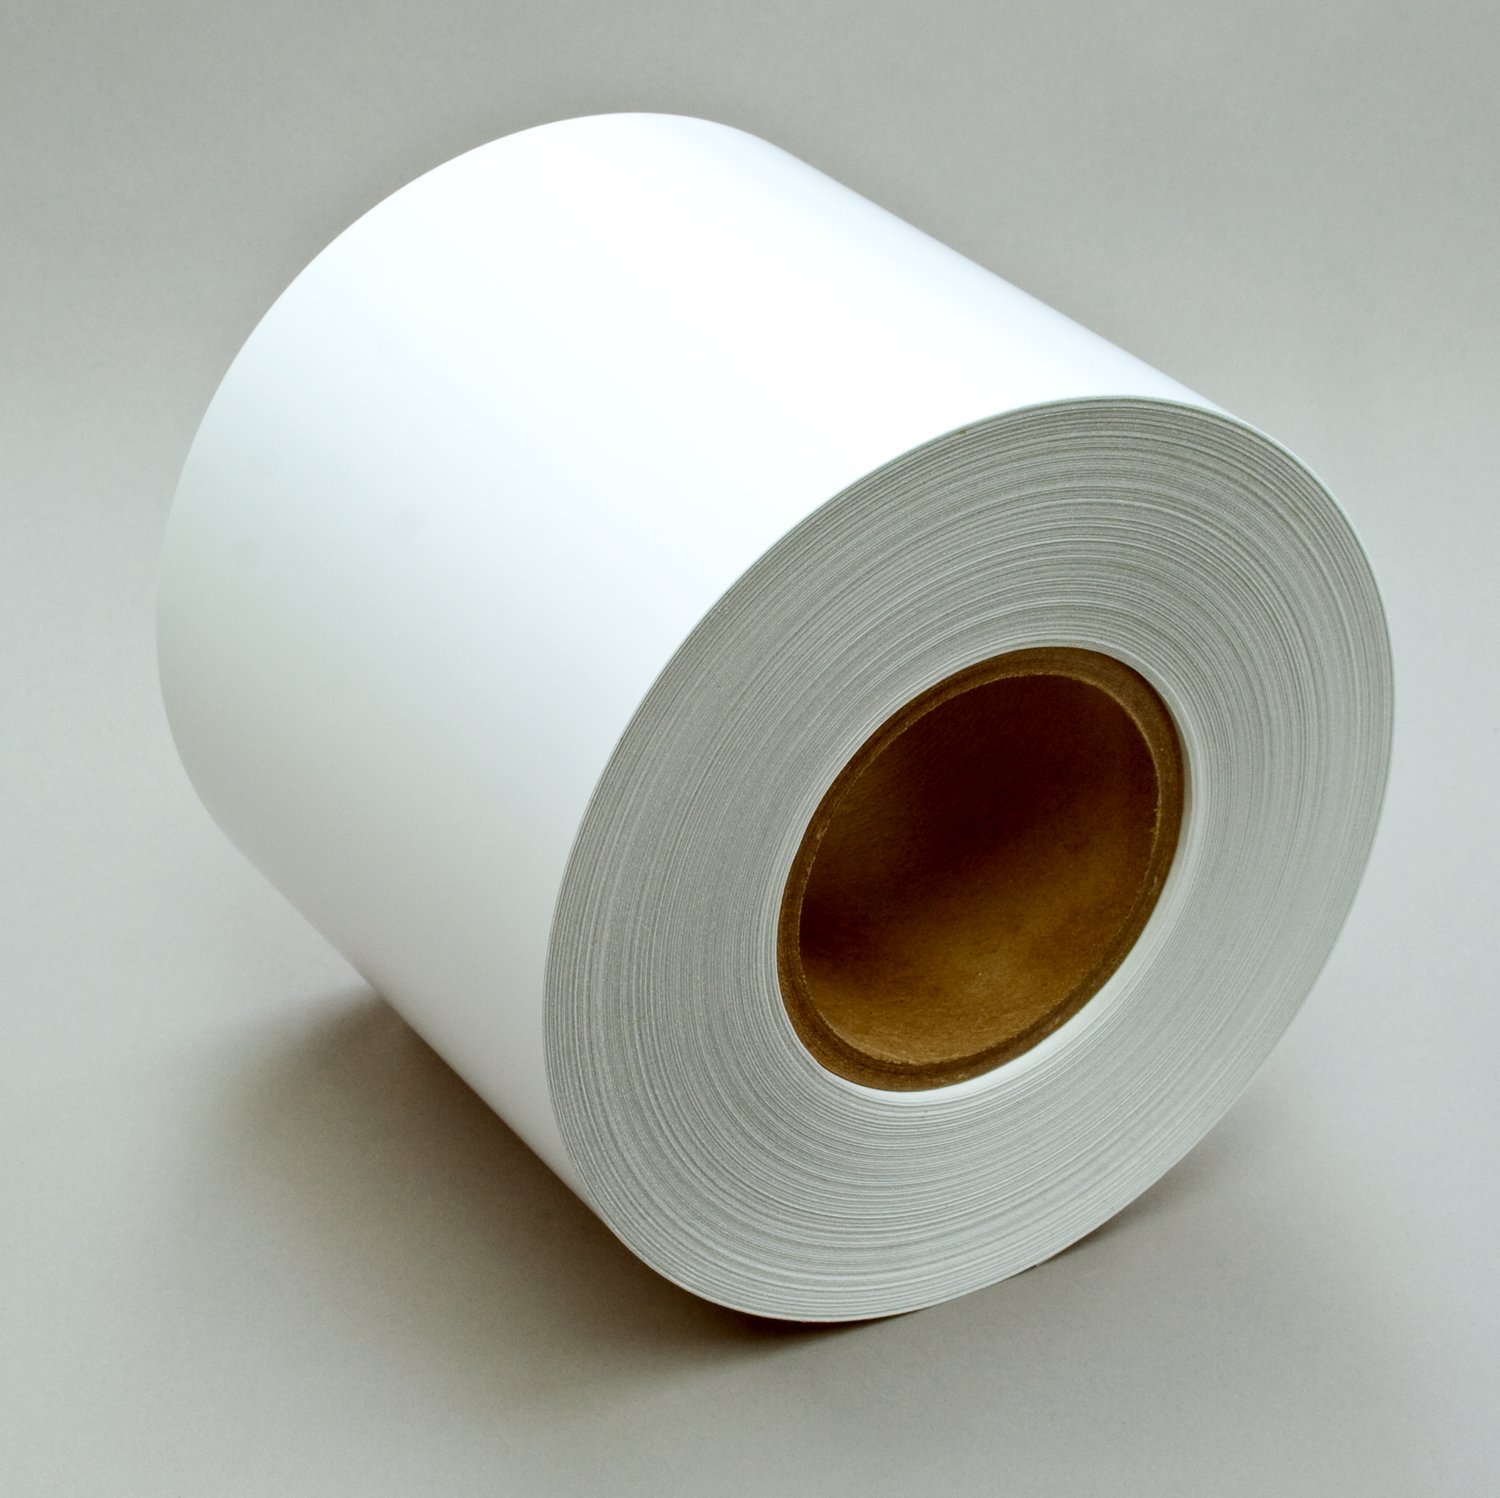 7000123332 - 3M Dot Matrix Label Material 7883, Silver Polyester Matte, 6 in x 1668
ft, 1 Roll/Case